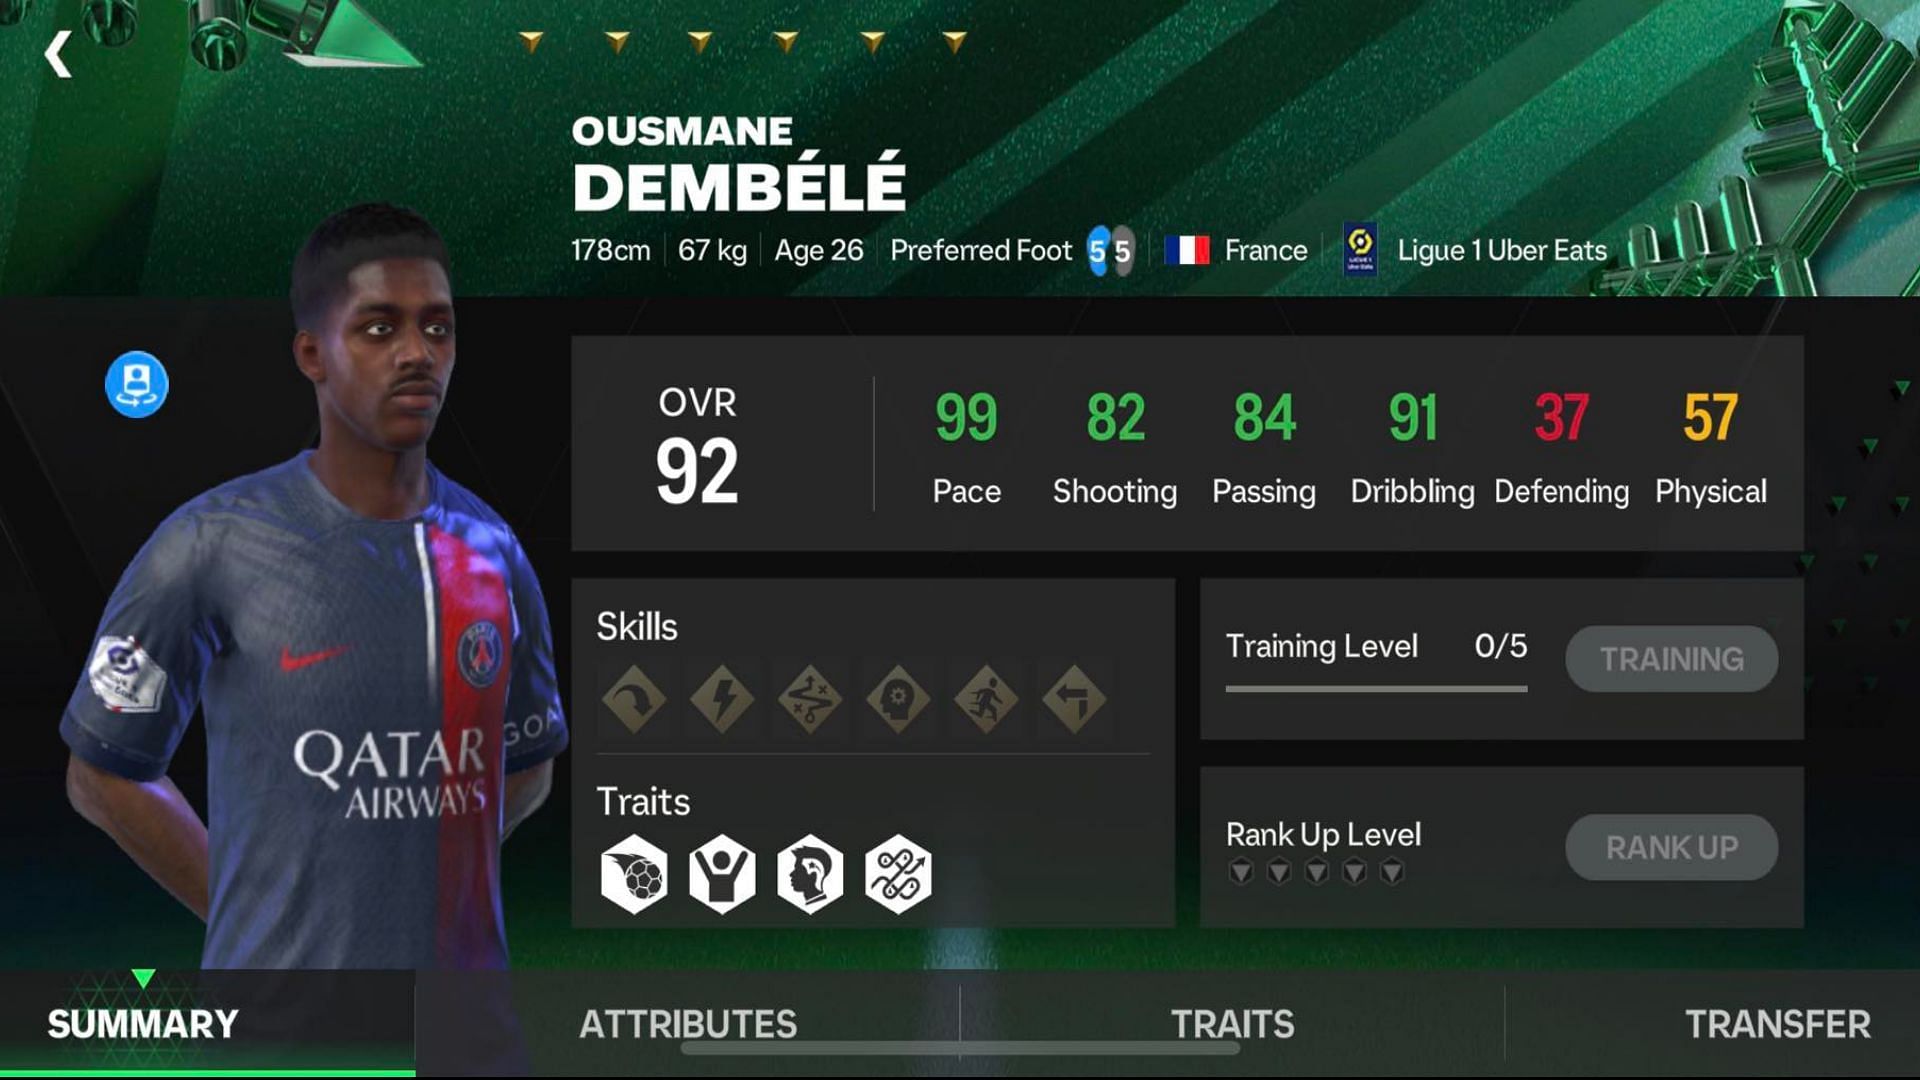 92 OVR Ousmane Dembele can be obtained from Star Pass 4 (Image via EA Sports)